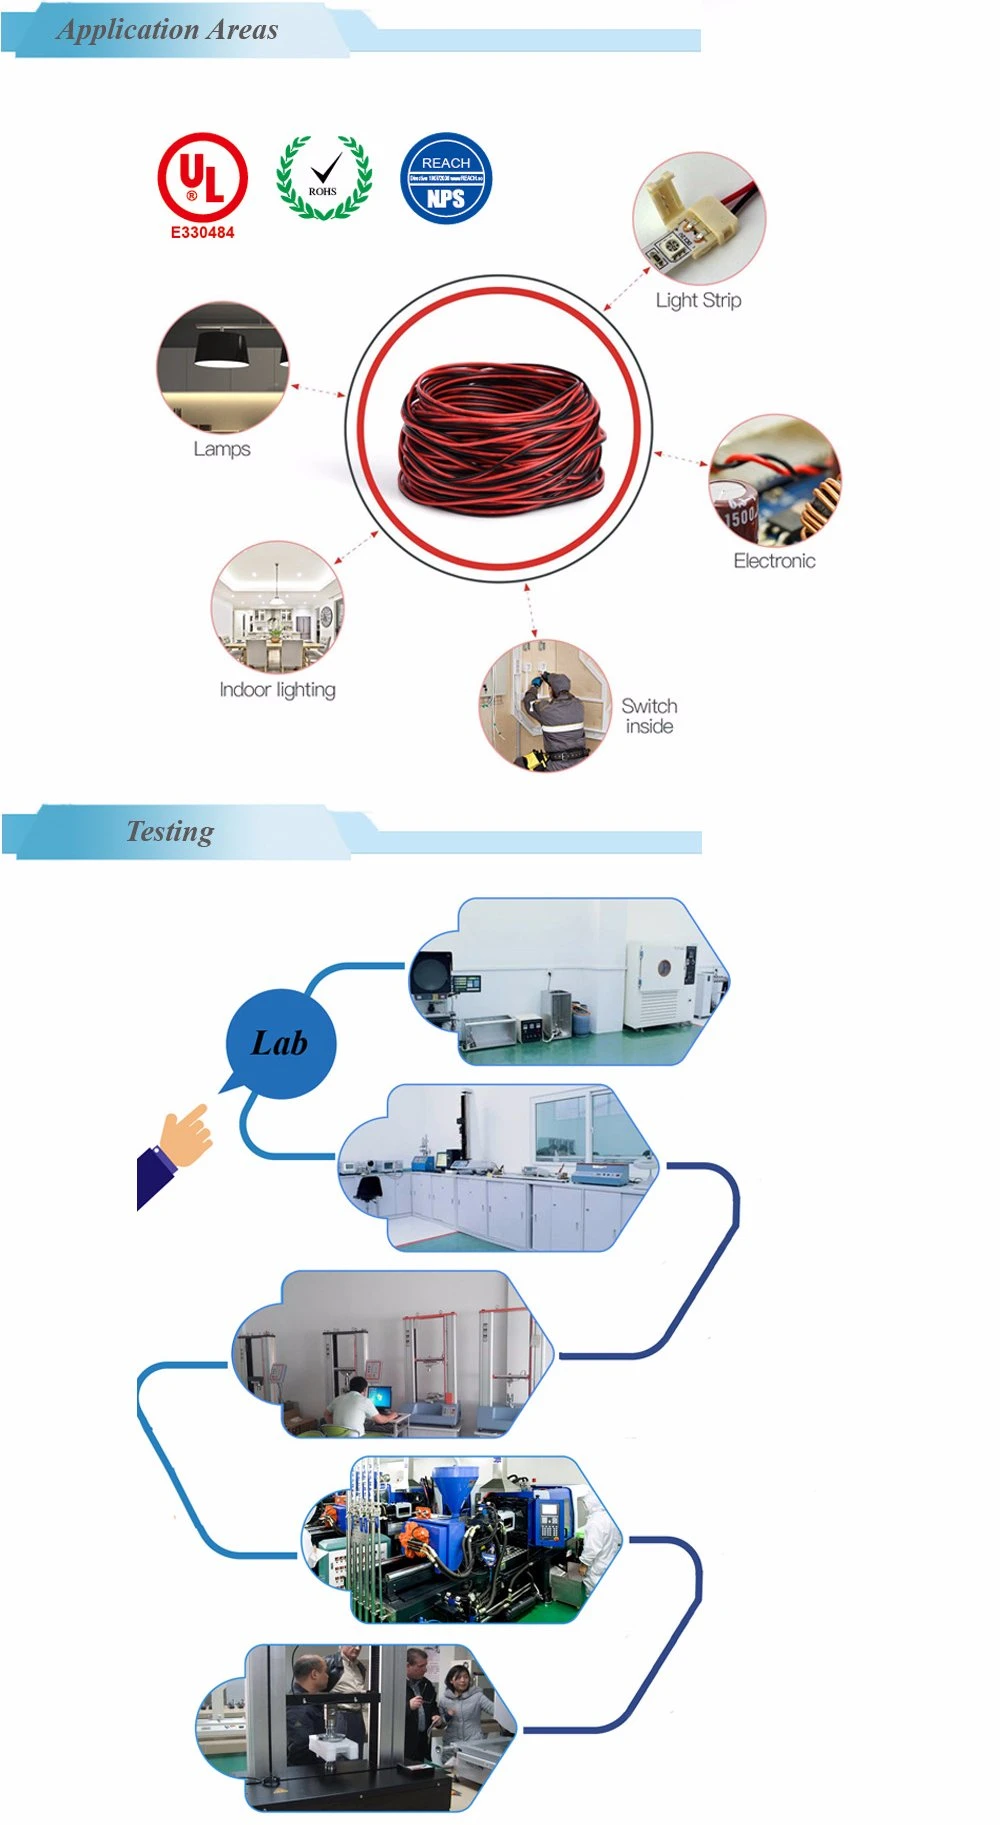 UL Certificated 105 Degree 300V Irradiated Xlpvc Electrical Wire for Air Conditioner Lead Assy